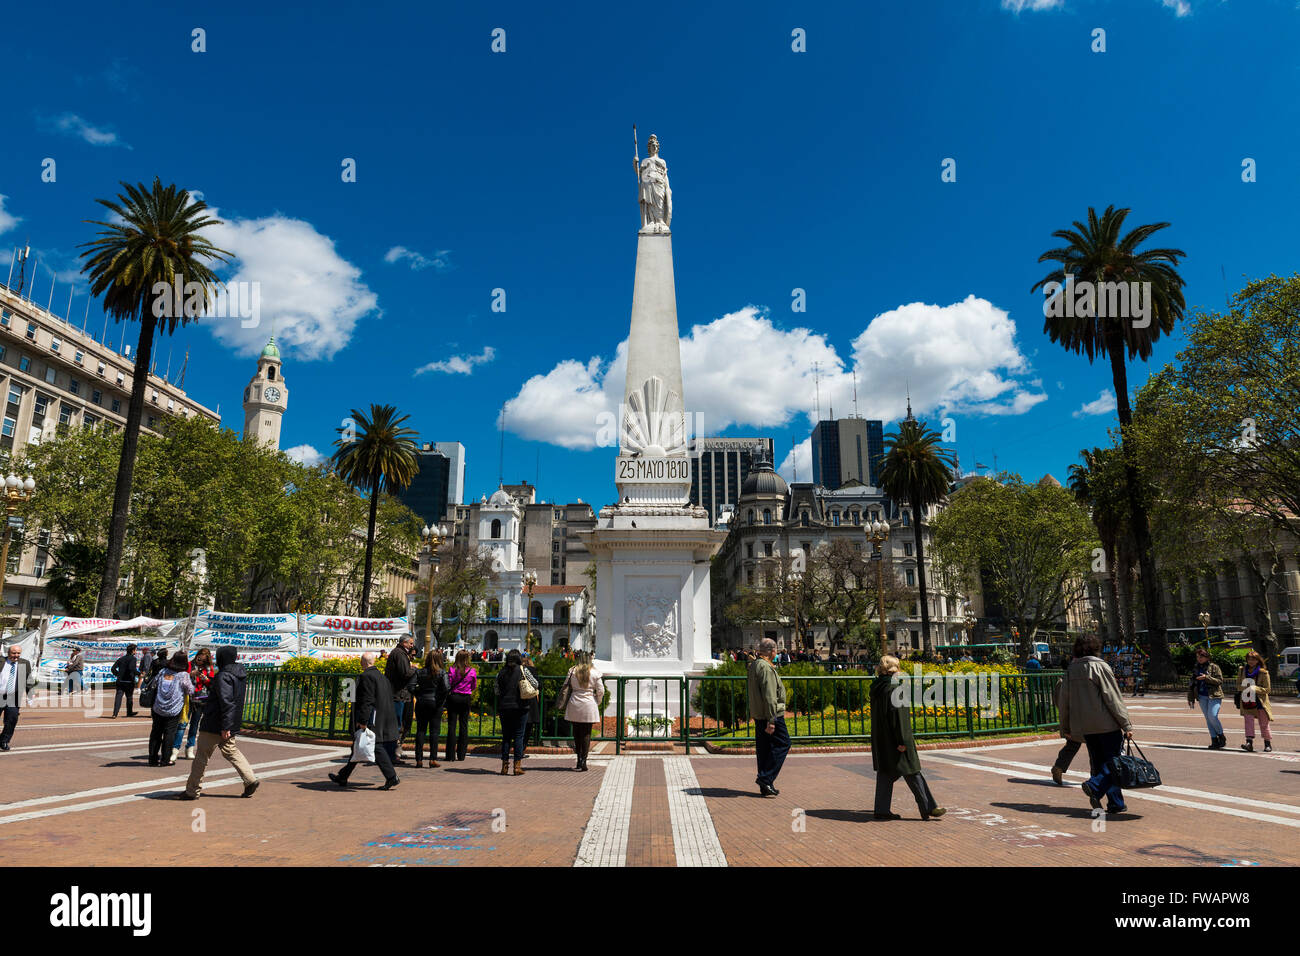 Buenos Aires, Argentina - October 4, 2013: People in the Plaza de Mayo in Buenos Aires, Argentina. Stock Photo